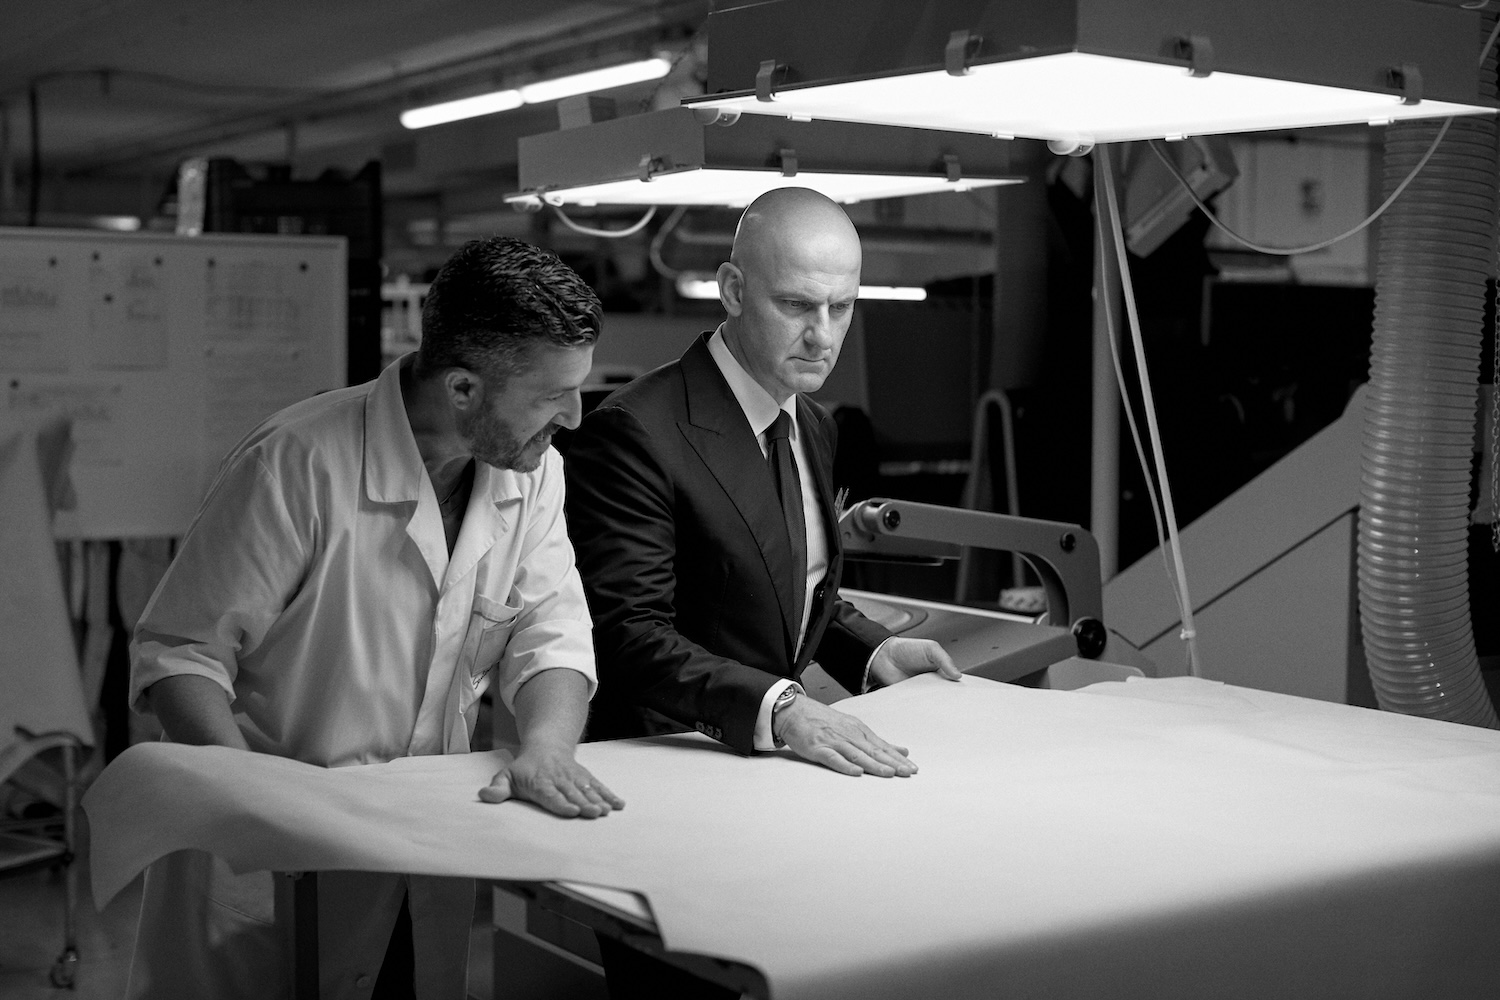 Santoni produces up to 2,500 handmade shoes daily, crafted by a team of 700 skilled artisans